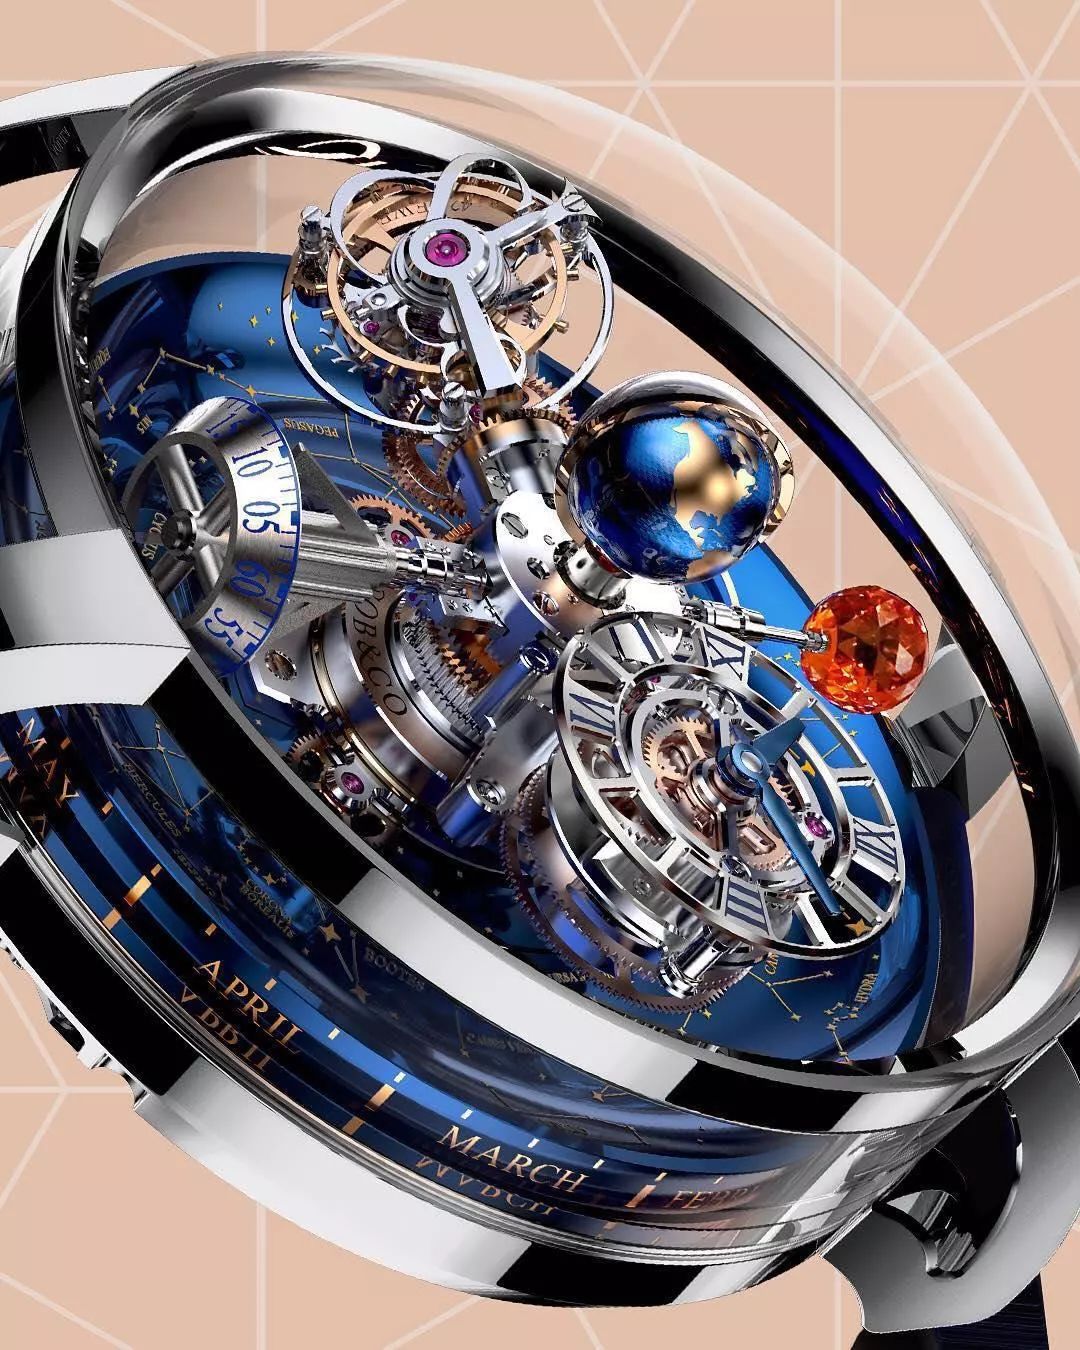 This model presents the brand's high level of watchmaking craftsmanship.